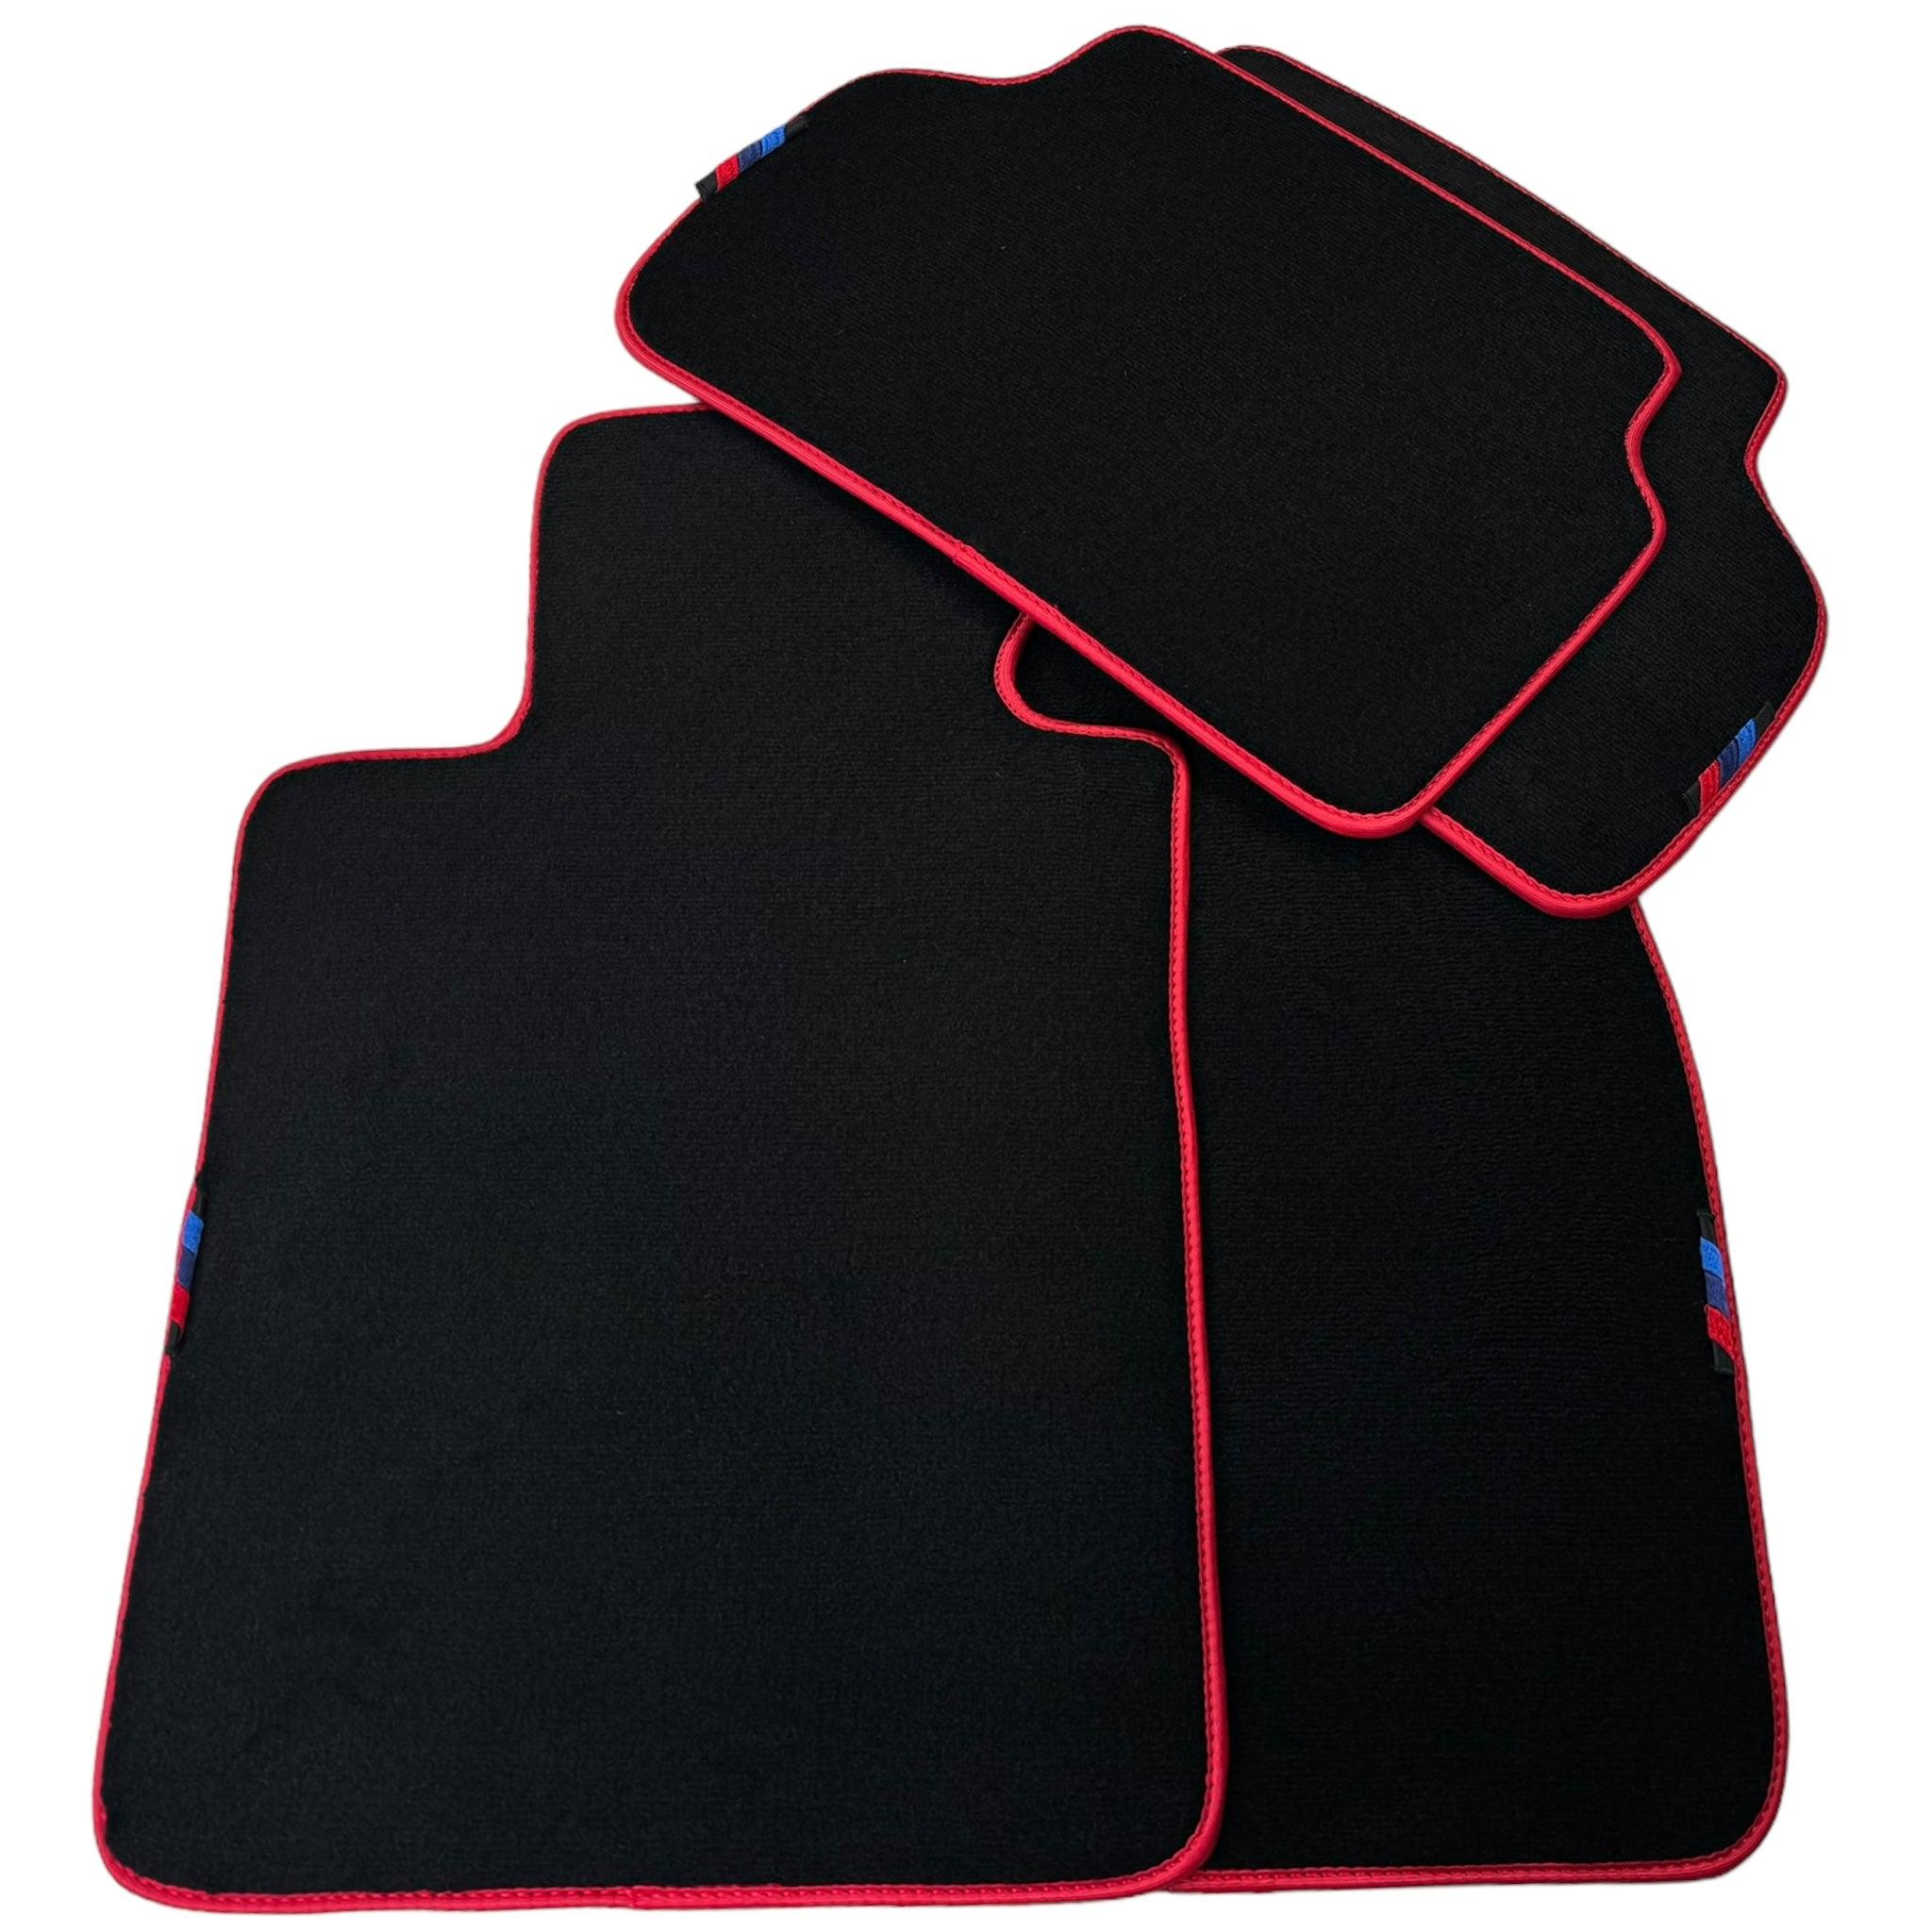 Black Floor Mats For BMW 3 Series E36 Convertible | Red Trim